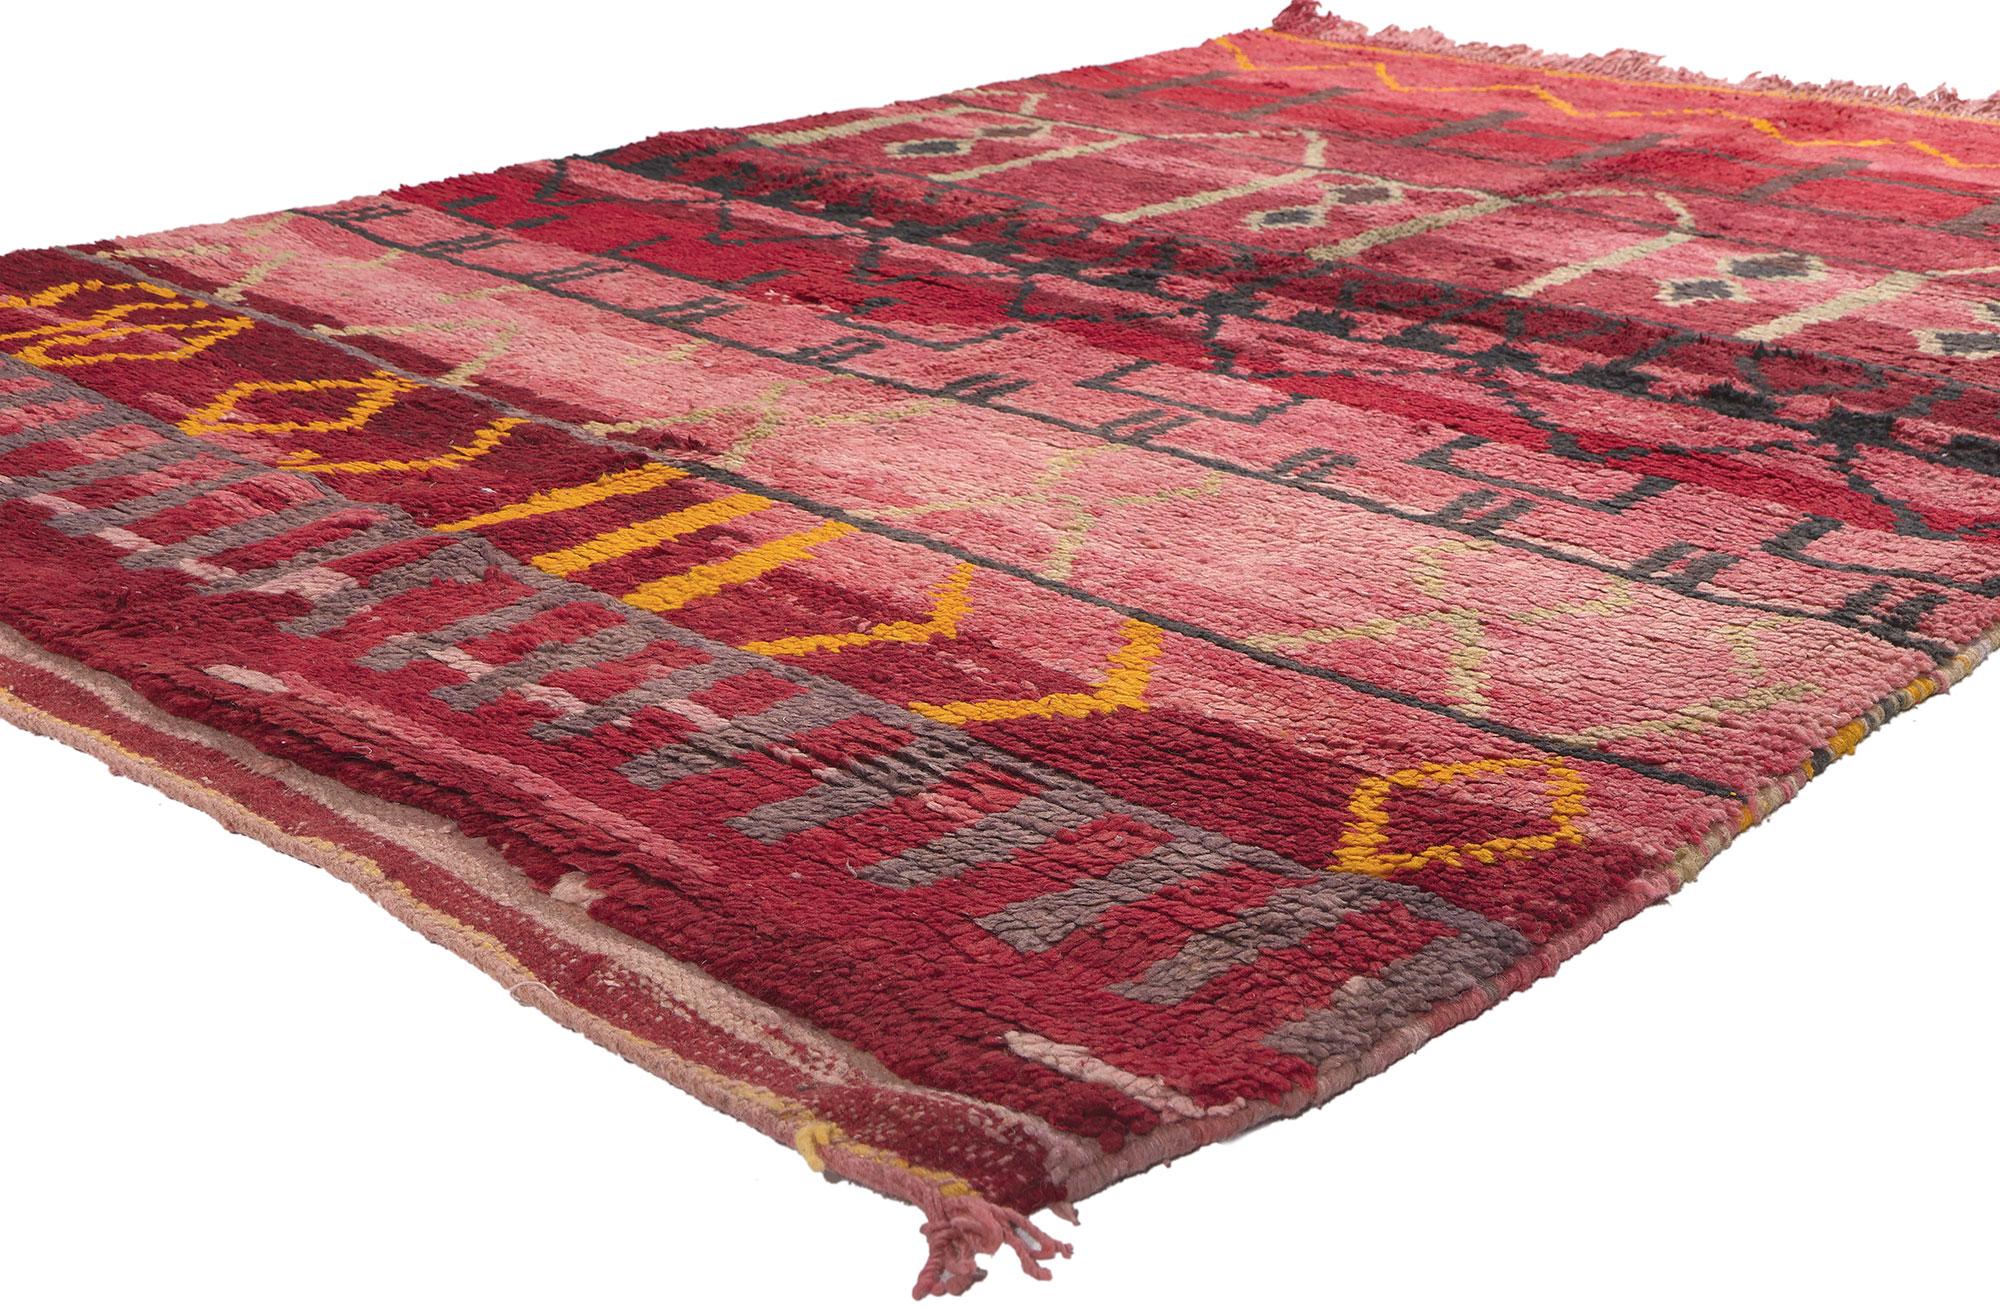 20288 Vintage Rehamna Moroccan Rug, 05'03 x 07'08. From the sun-drenched plains of Rehamna east of Marrakech emerges a woven wonder that defies expectations with its rich and eclectic designs. Immersed in a Maximalist aesthetic, this hand-knotted